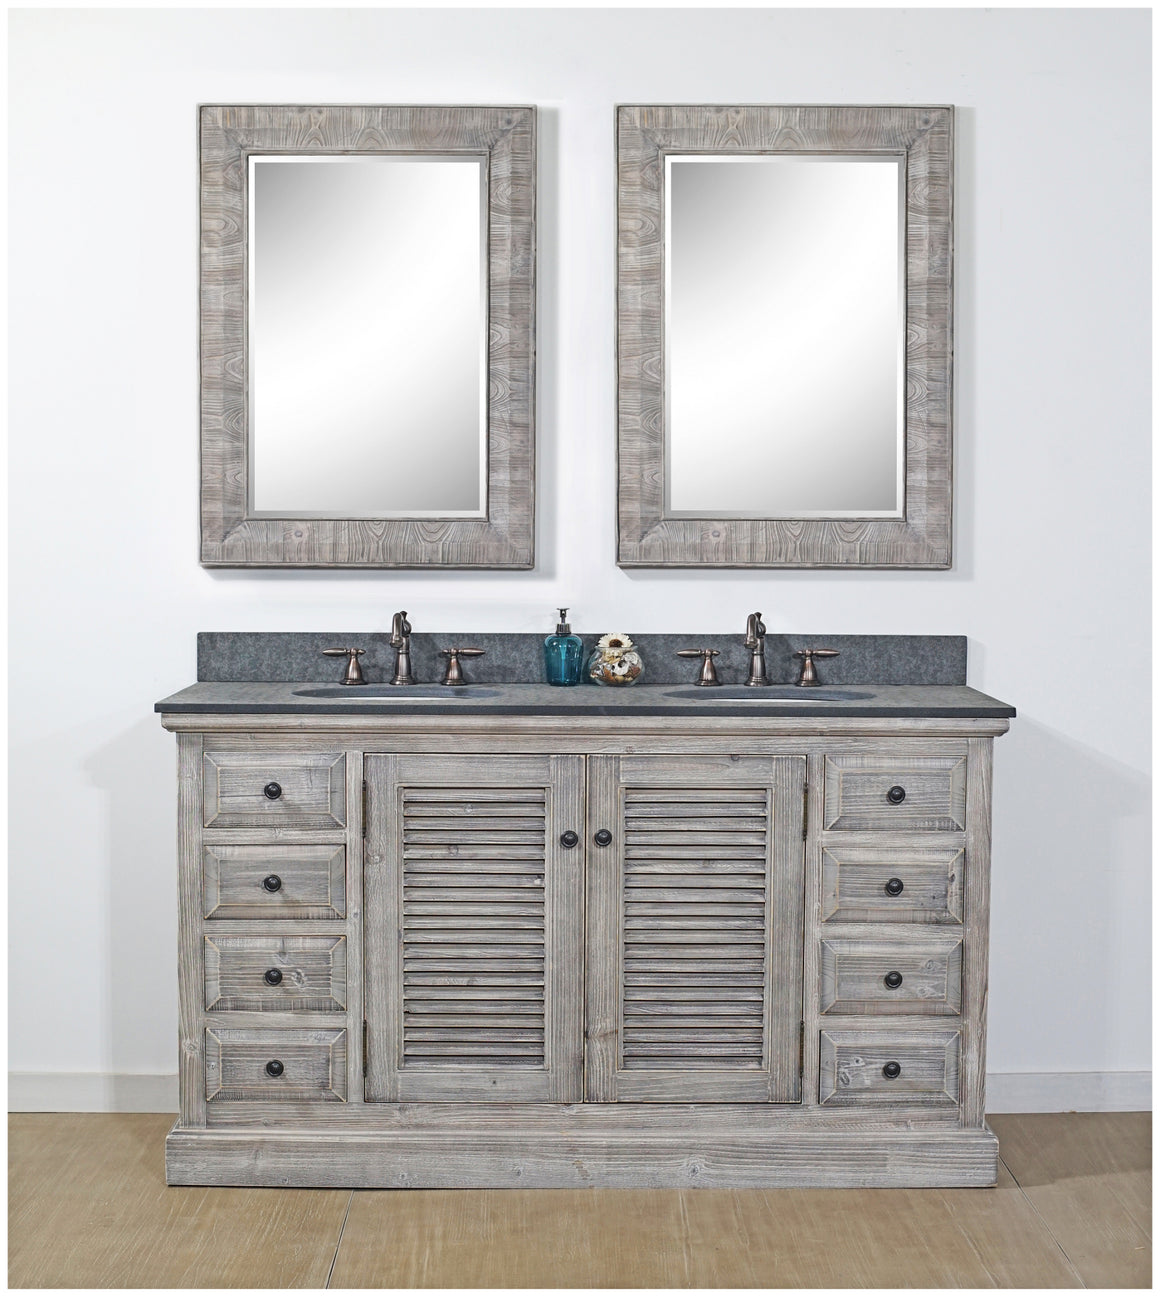 60" RUSTIC SOLID FIR DOUBLE SINKS VANITY IN GREY DRIFTWOOD WITH POLISHED TEXTURED SURFACE GRANITE TOP-NO FAUCET